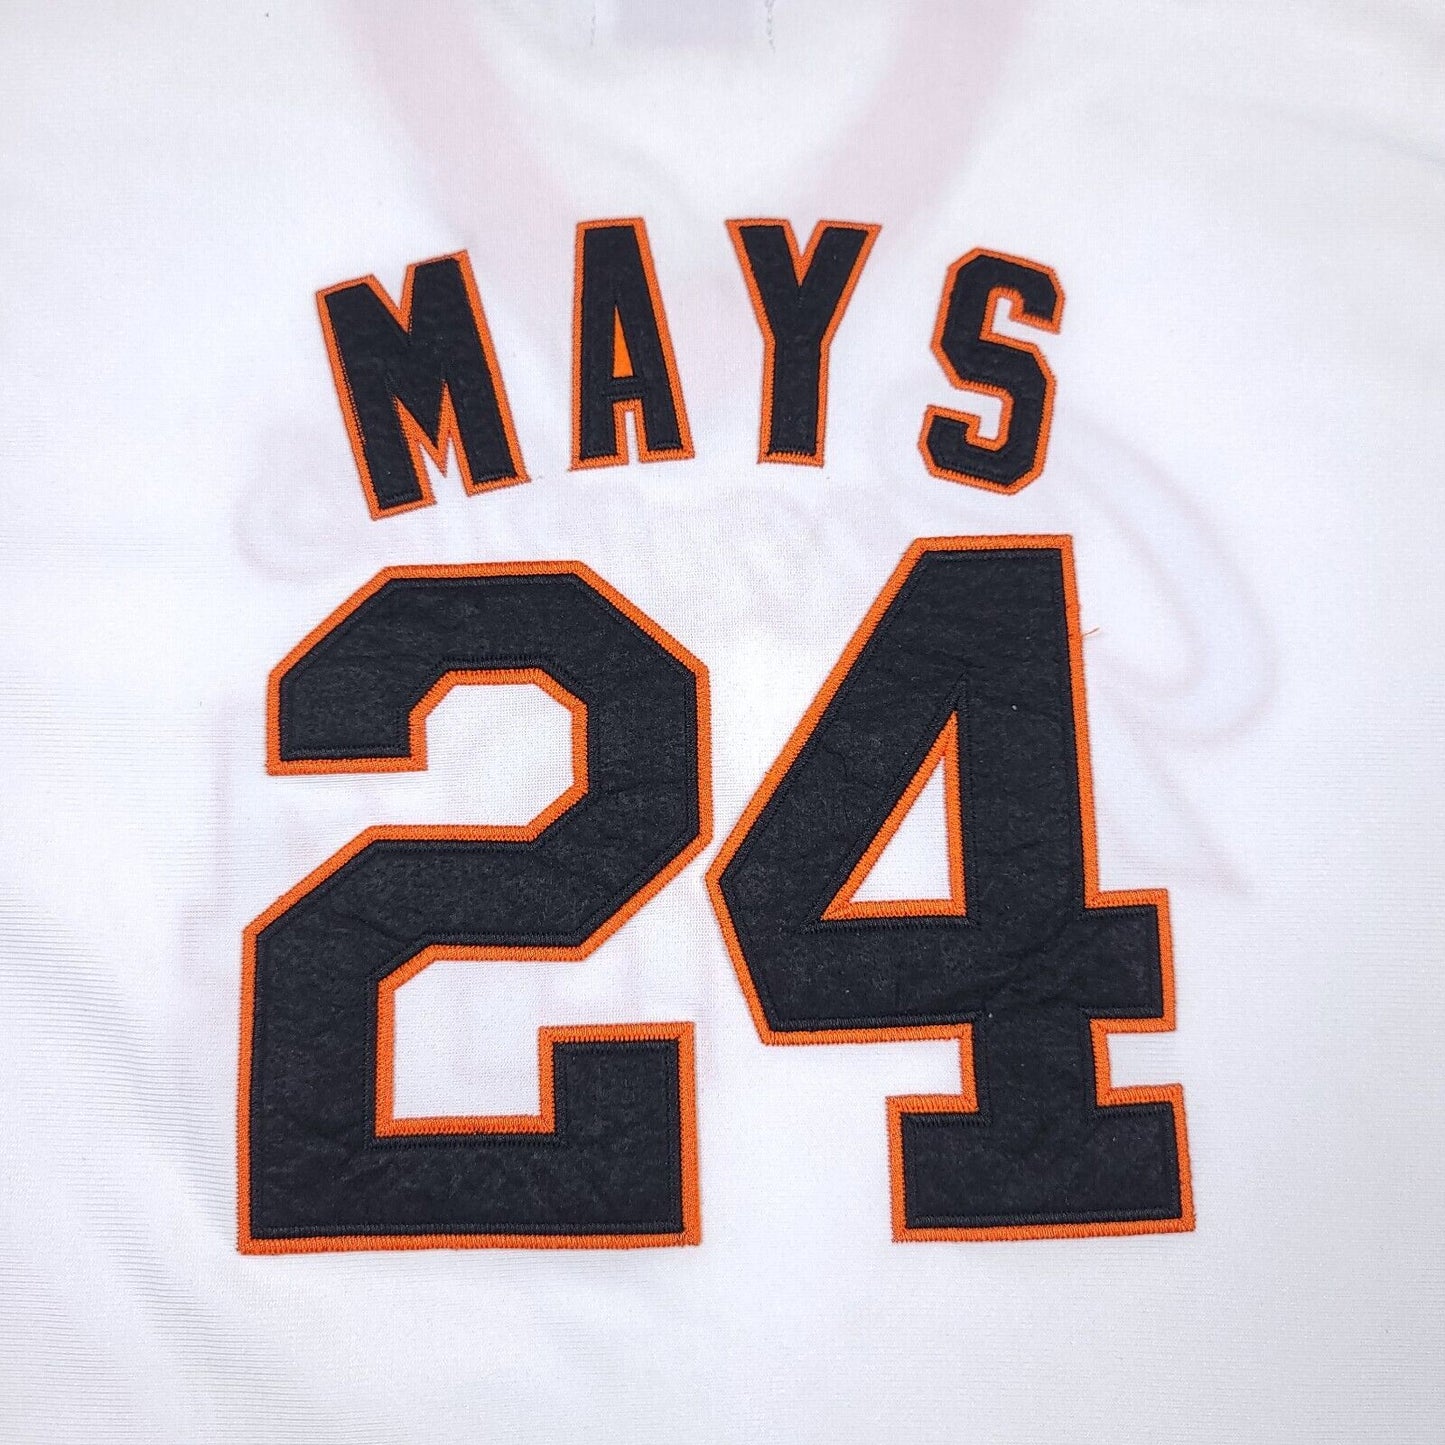 Willie Mayes #24 Giants Mitchell & Ness Cooperstown Authentic Jersey